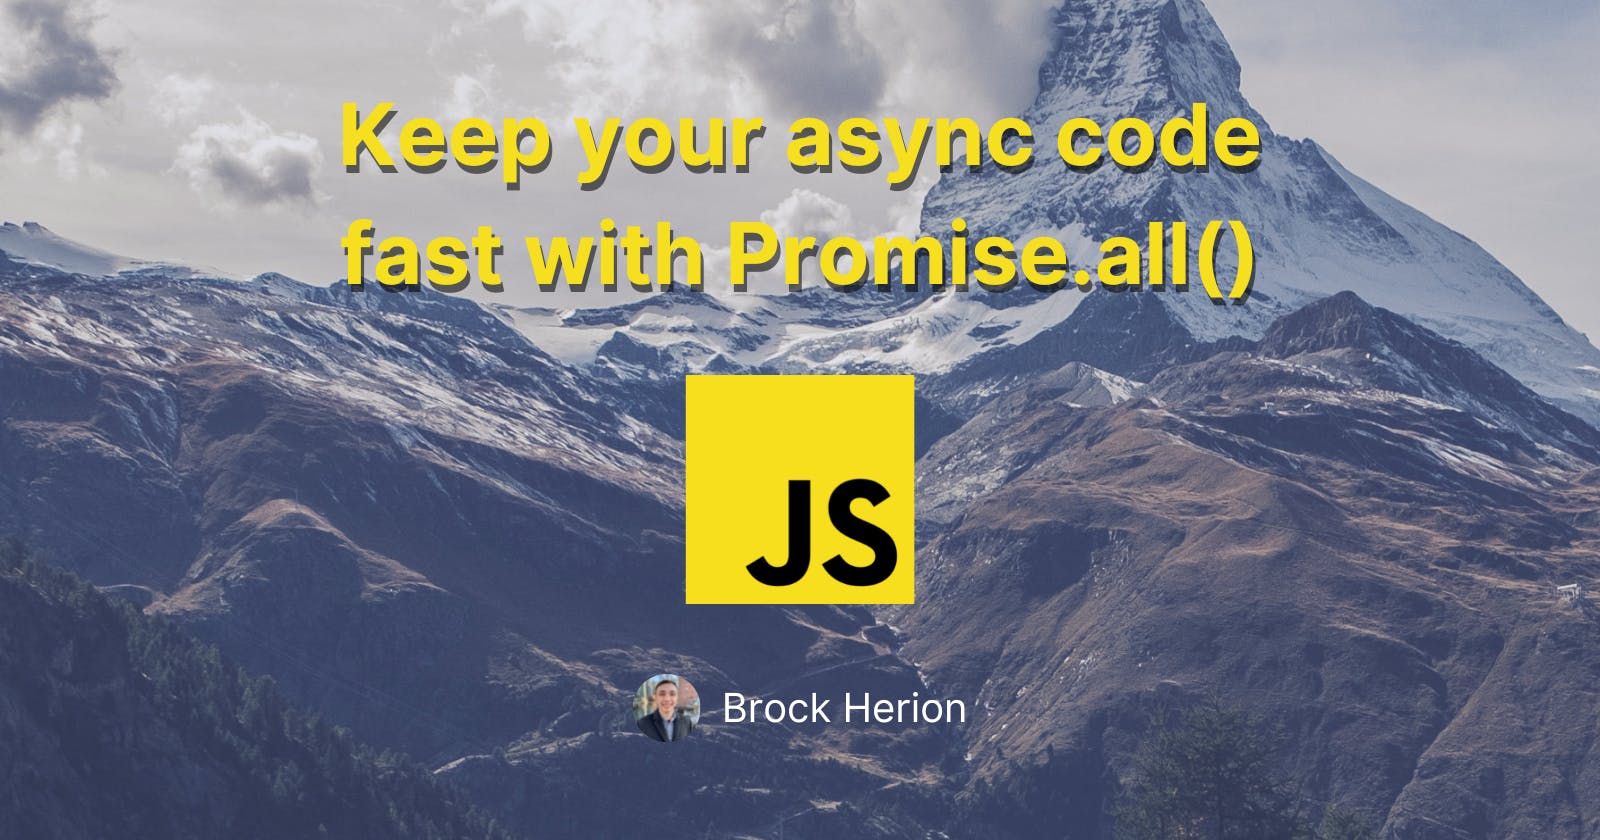 Keep your async code fast with Promise.all()